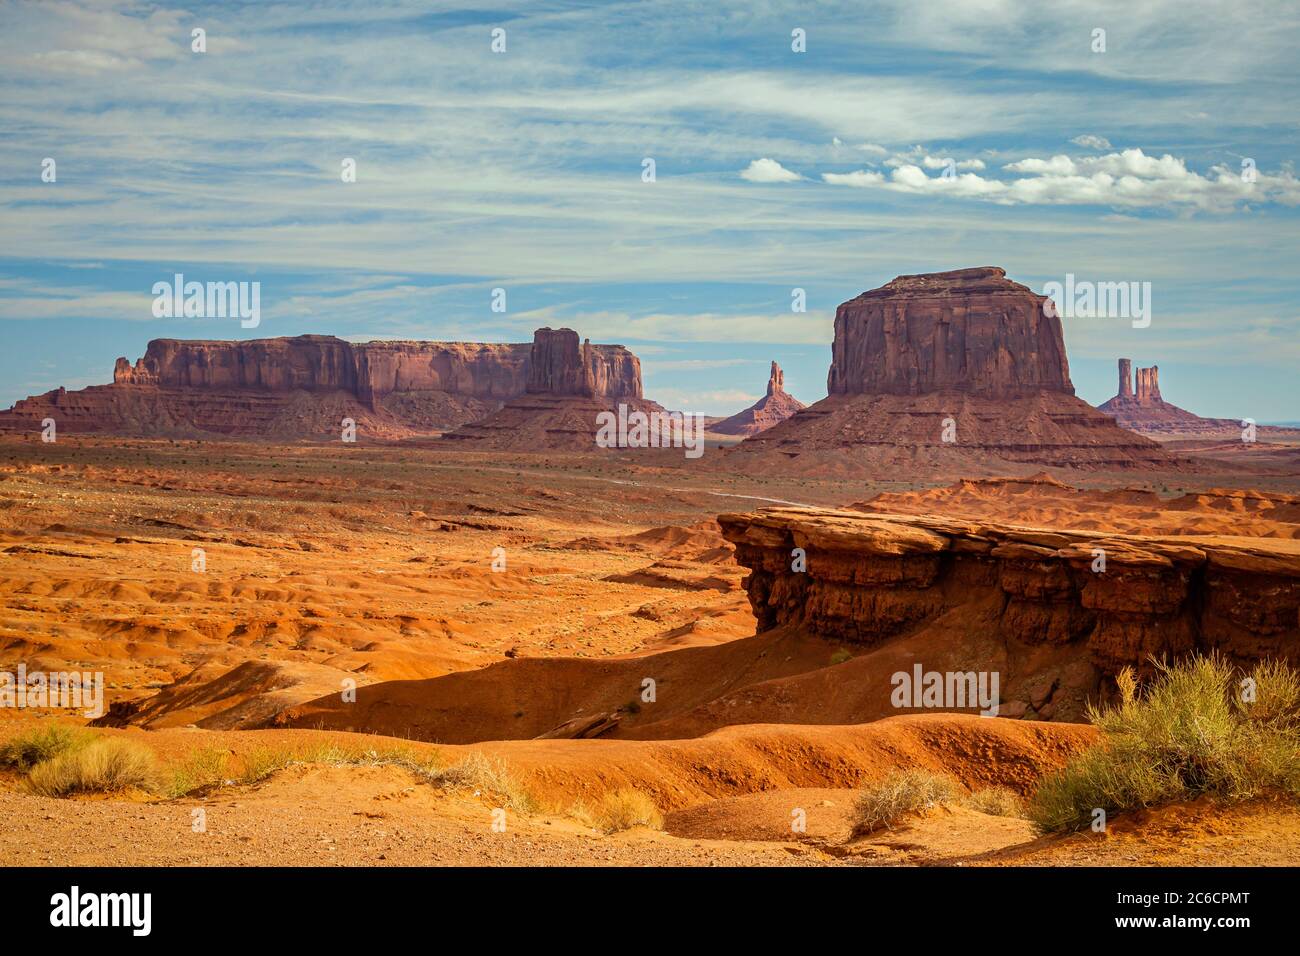 The iconic movie location in morning light, John Ford Point, Monument Valley, Arizona. Stock Photo